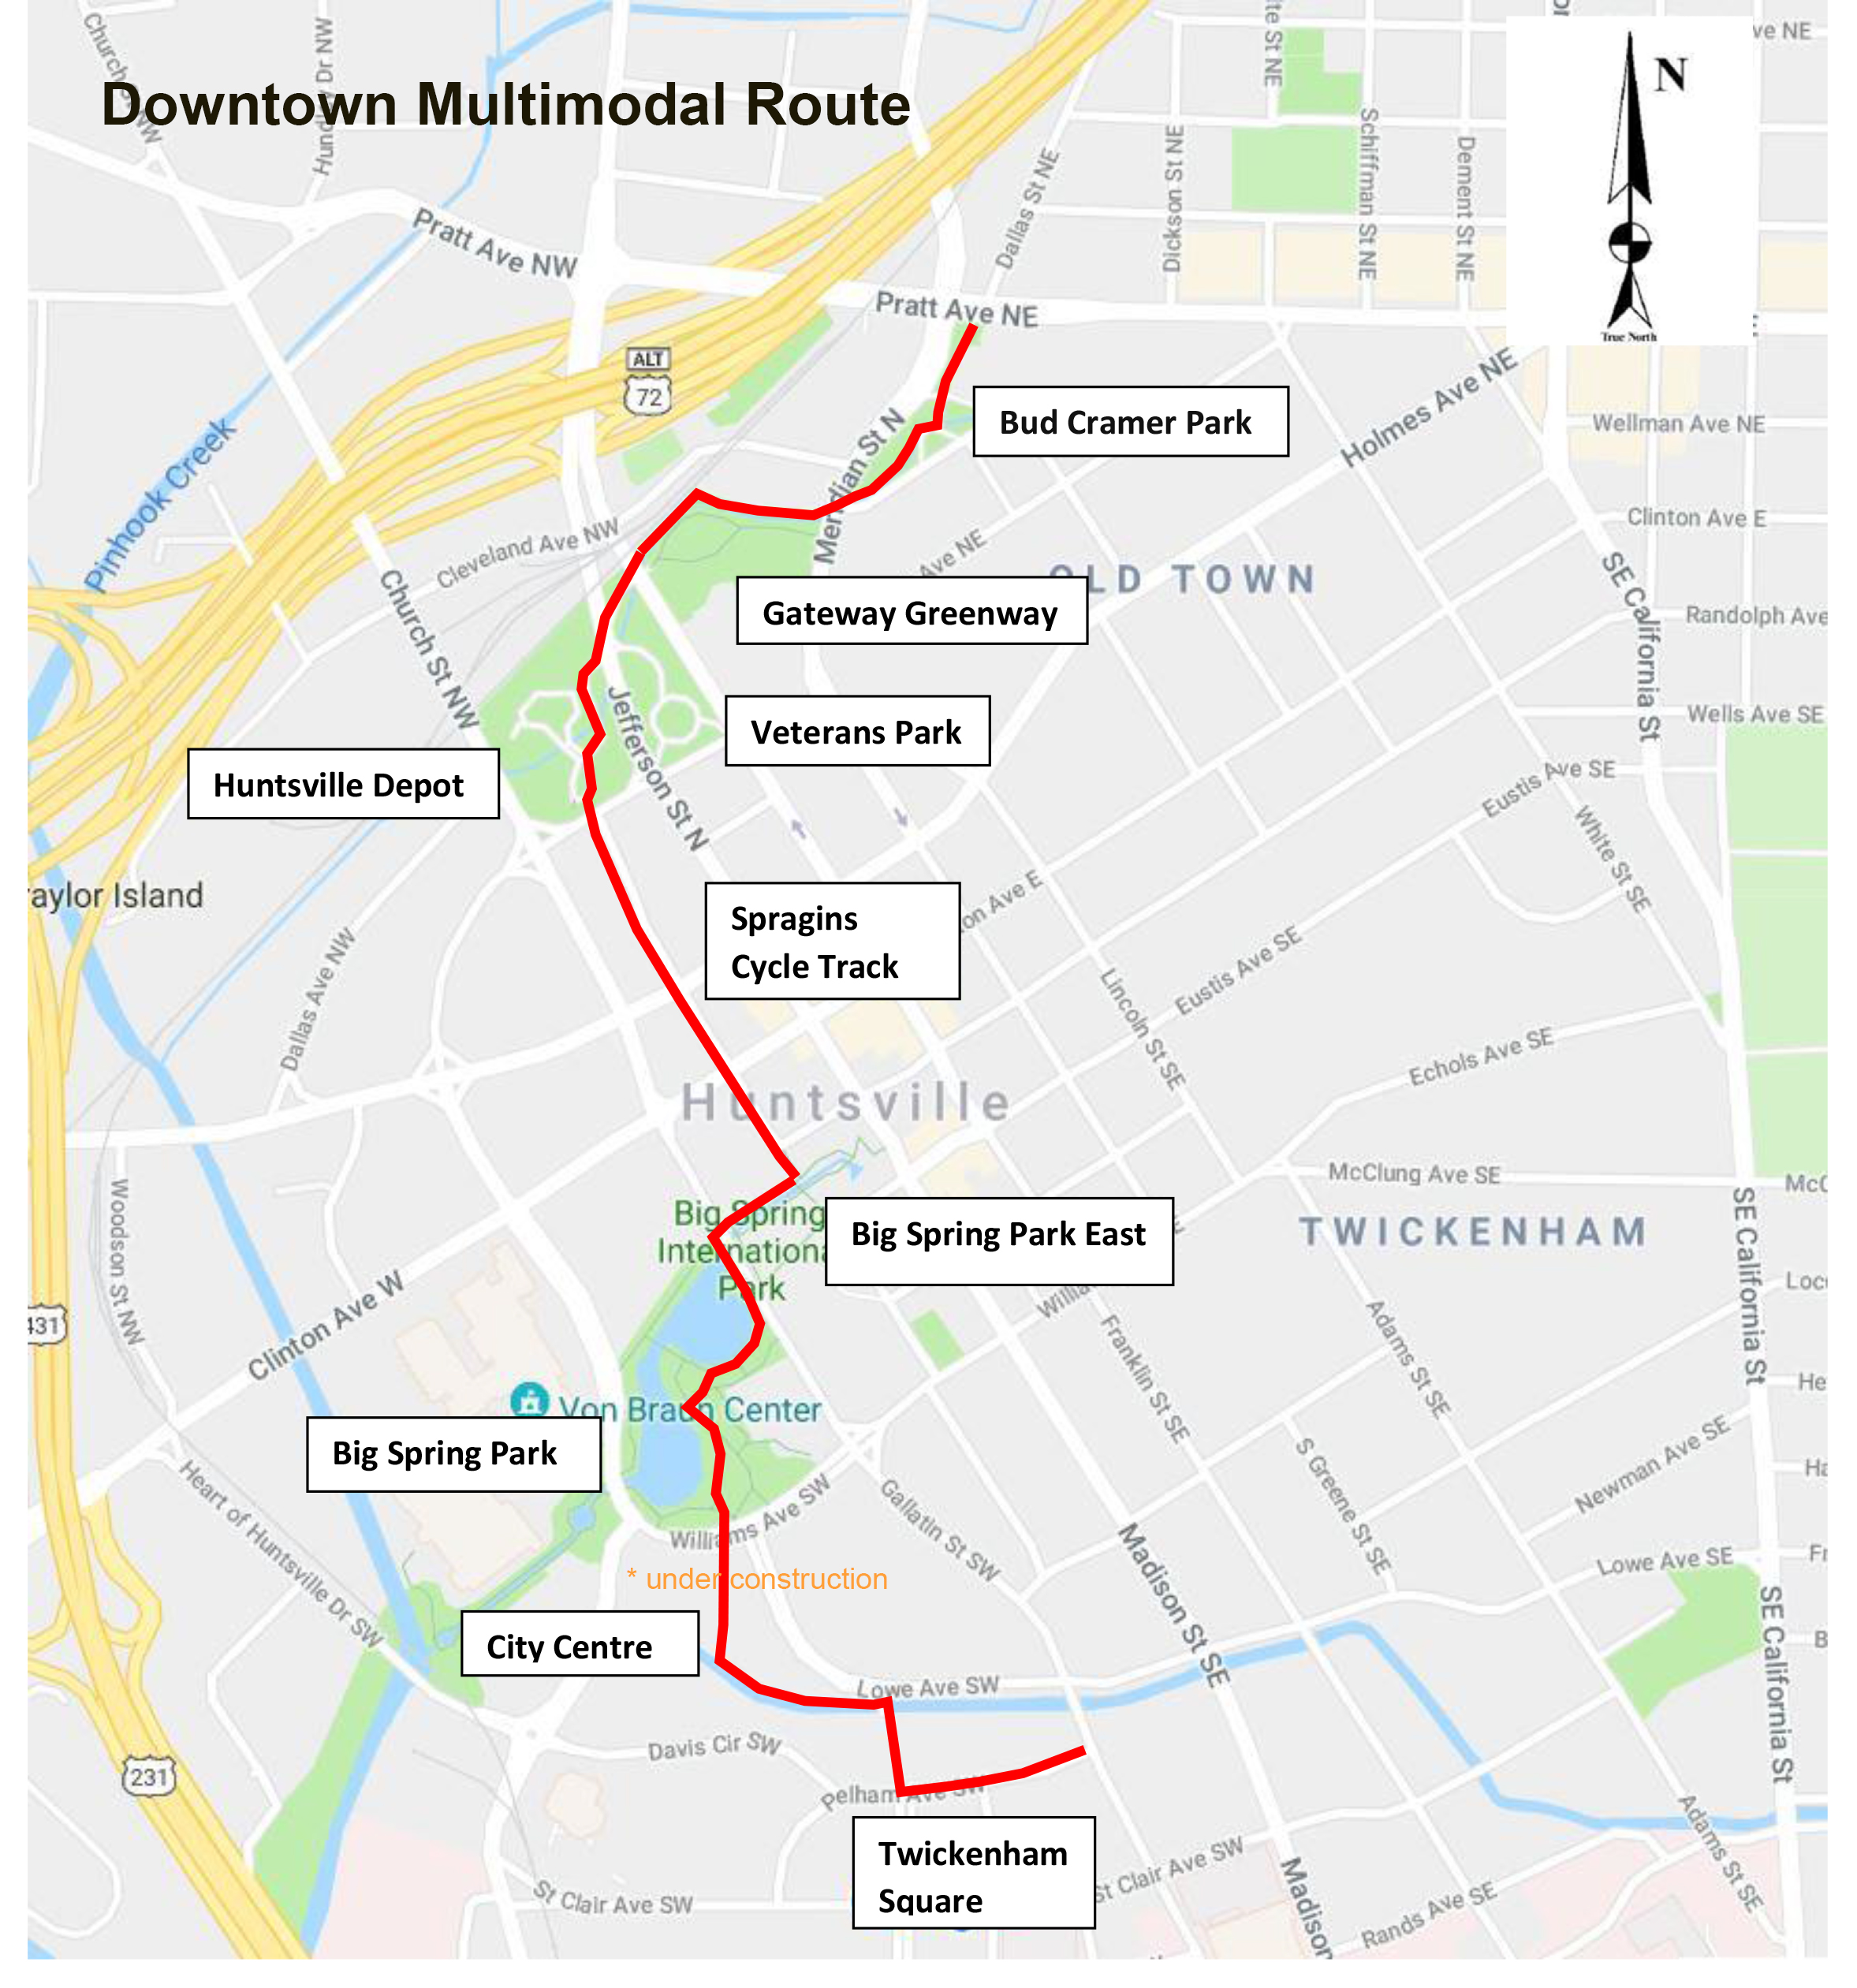 Downtown Multimodal Route Map